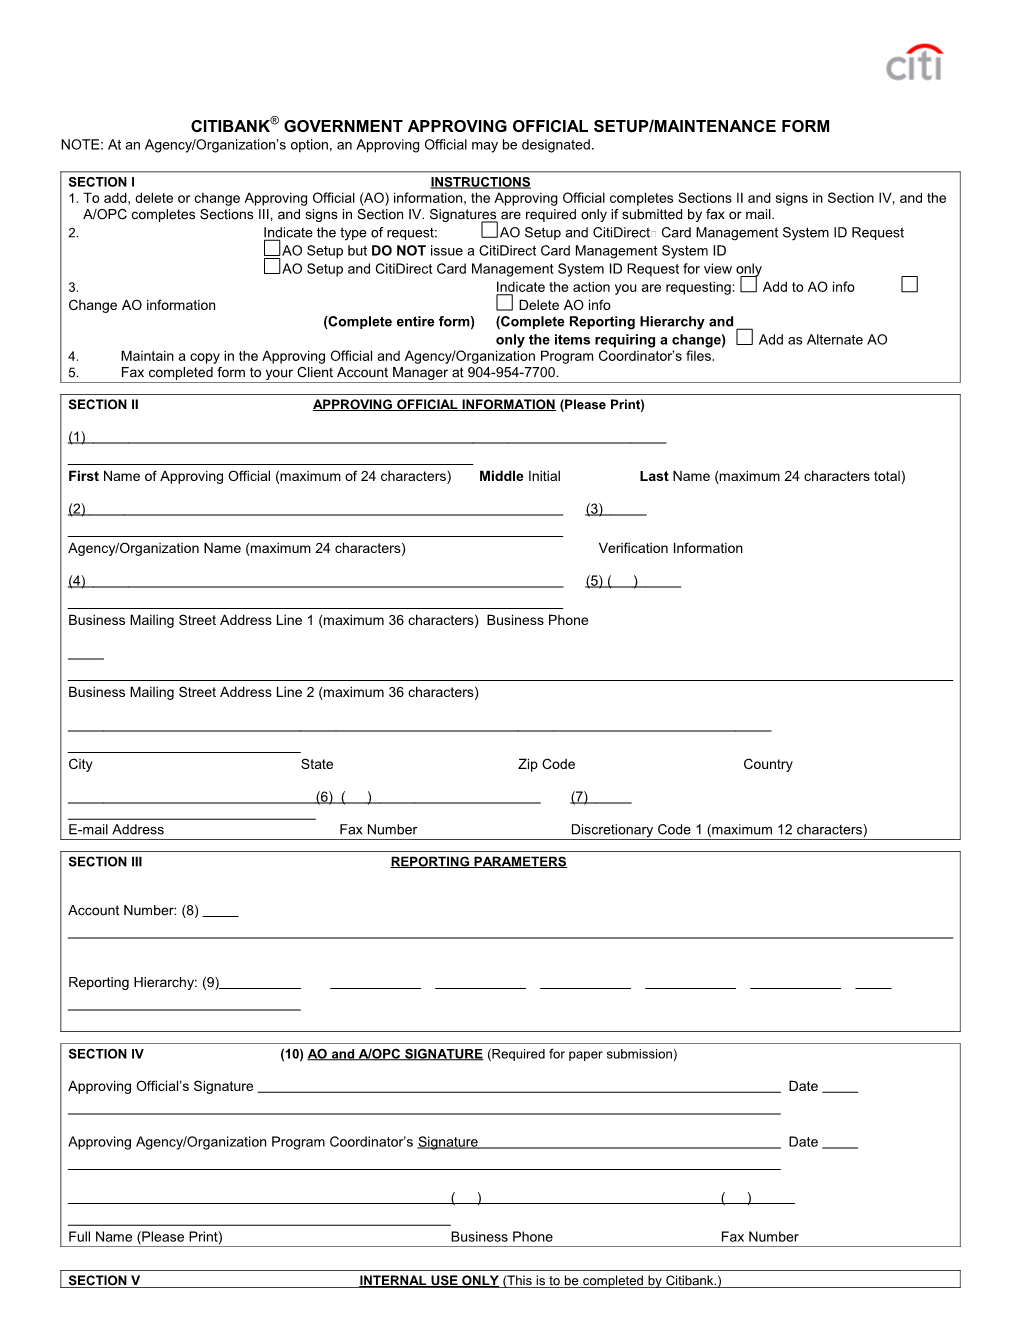 Government Approving Official Setup/Maintenance Form